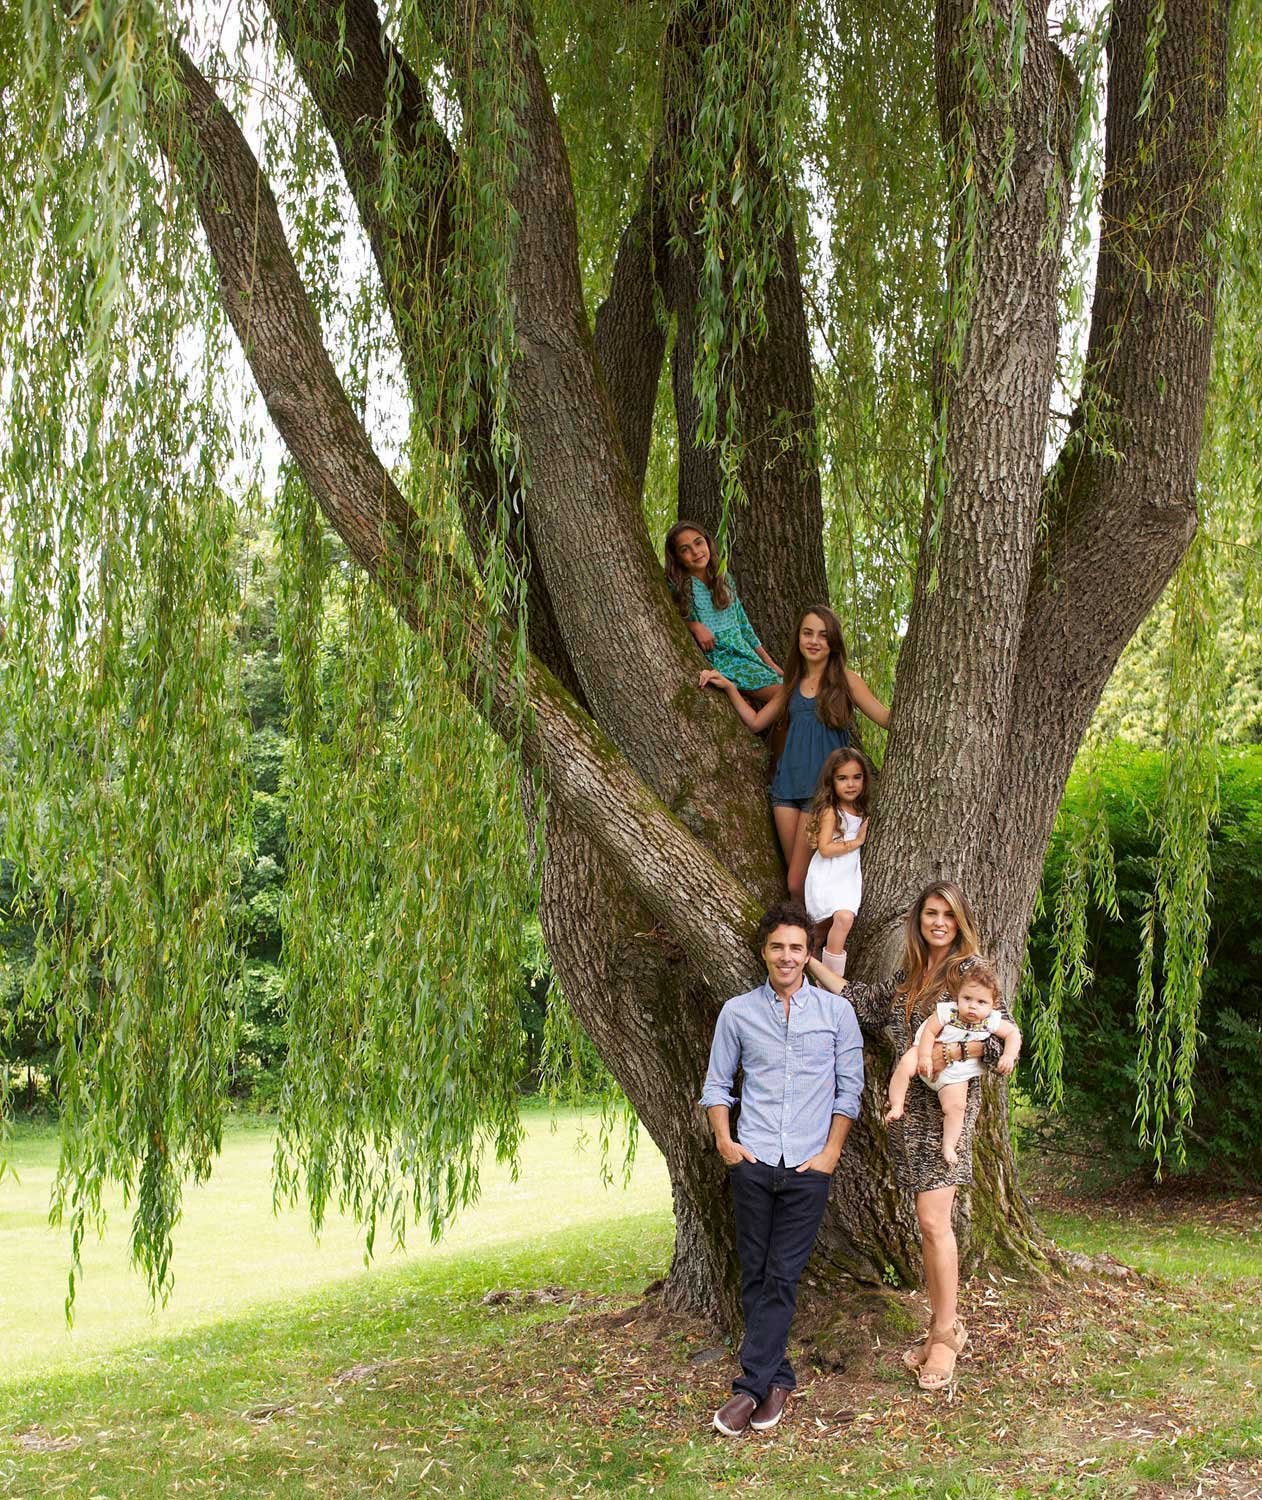  Shawn Levy and family at home in New York State 